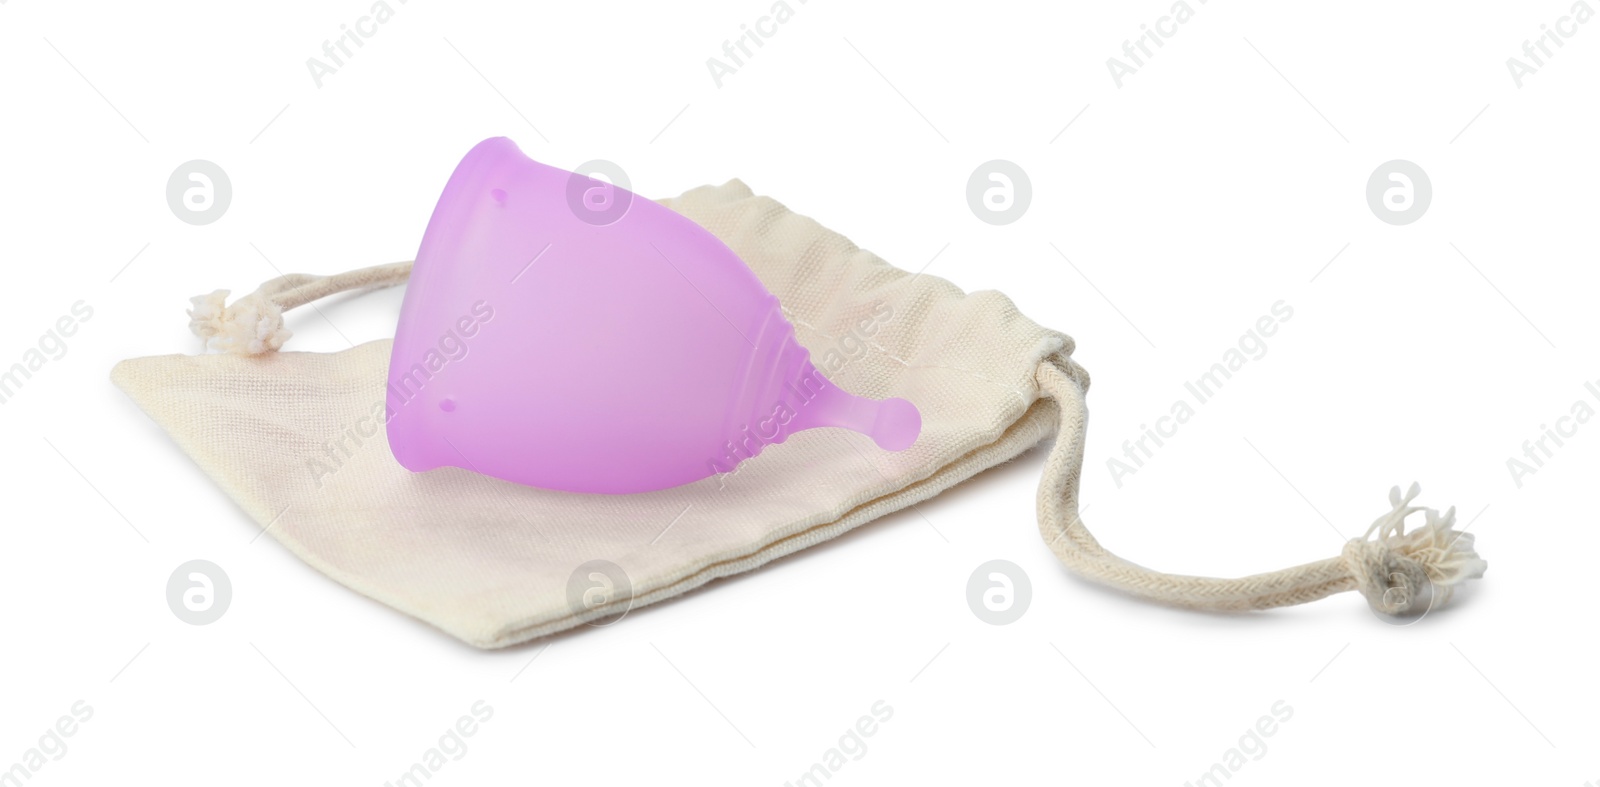 Photo of Silicone menstrual cup with cotton bag on white background